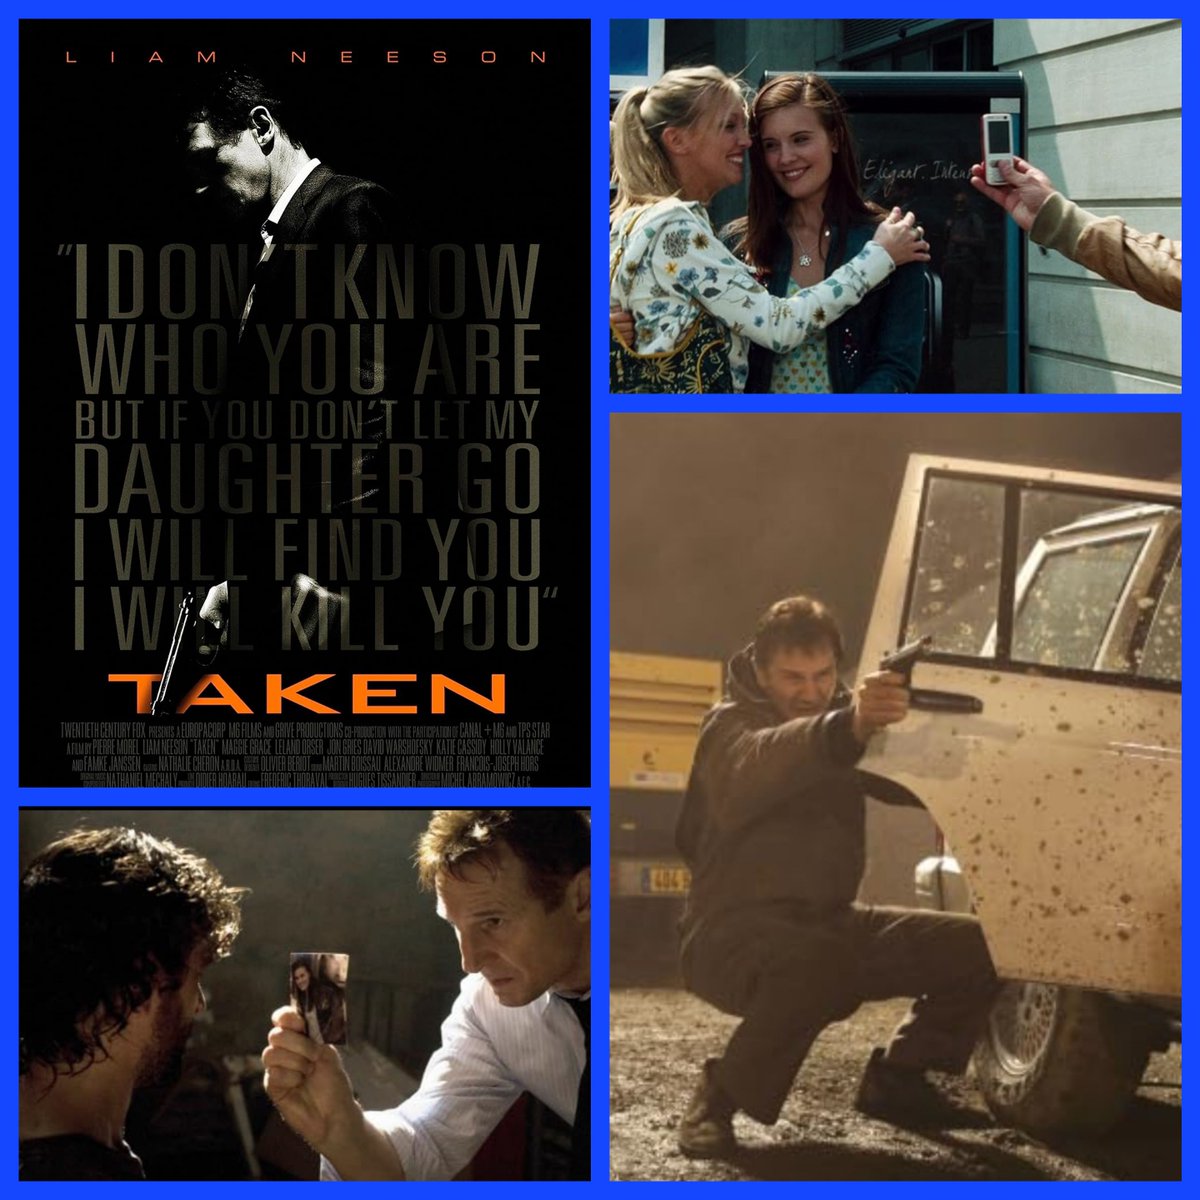 #RevengeMovies #FightBack  #FilmX

#Taken (2008)
A retired CIA agent travels across Europe and relies on his old skills to save his estranged daughter, who has been kidnapped while on a trip to Paris.
#LiamNeeson #MaggieGrace